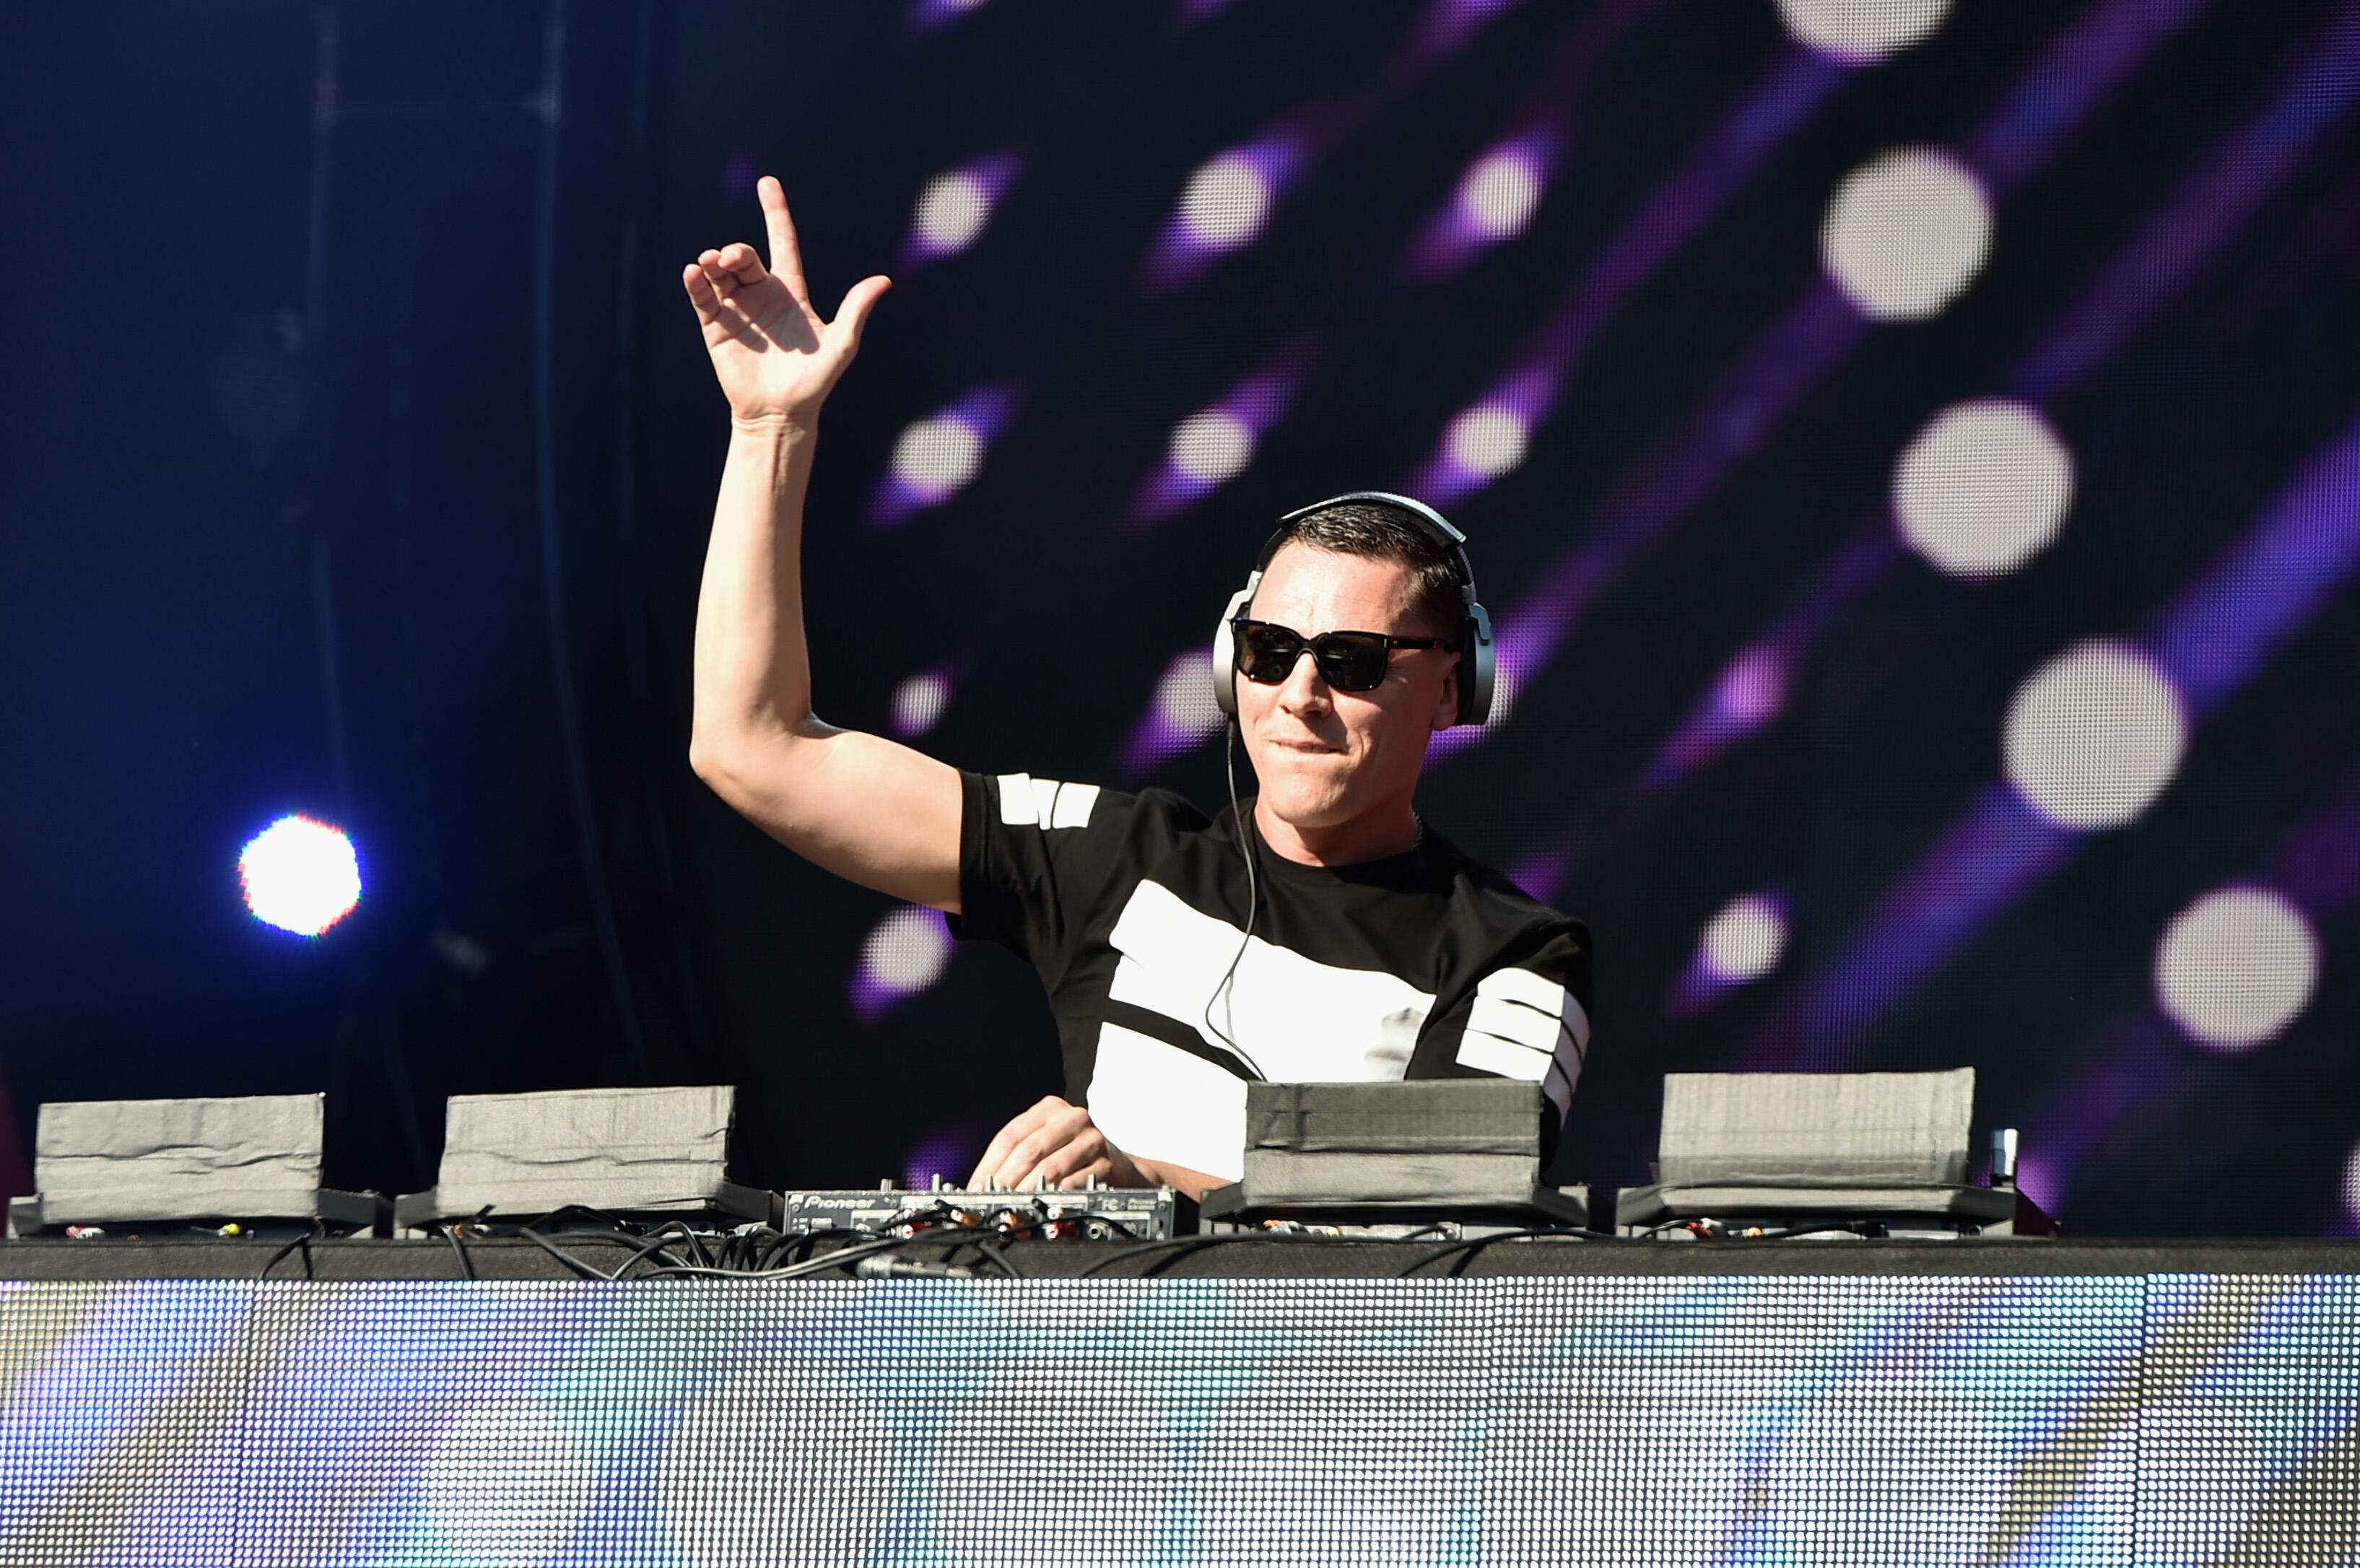 NEW YORK, NY - SEPTEMBER 27:  Tiesto performs onstage at the 2014 Global Citizen Festival to end extreme poverty by 2030 in Central Park on September 27, 2014 in New York City.  (Photo by Theo Wargo/Getty Images for Global Citizen Festival)